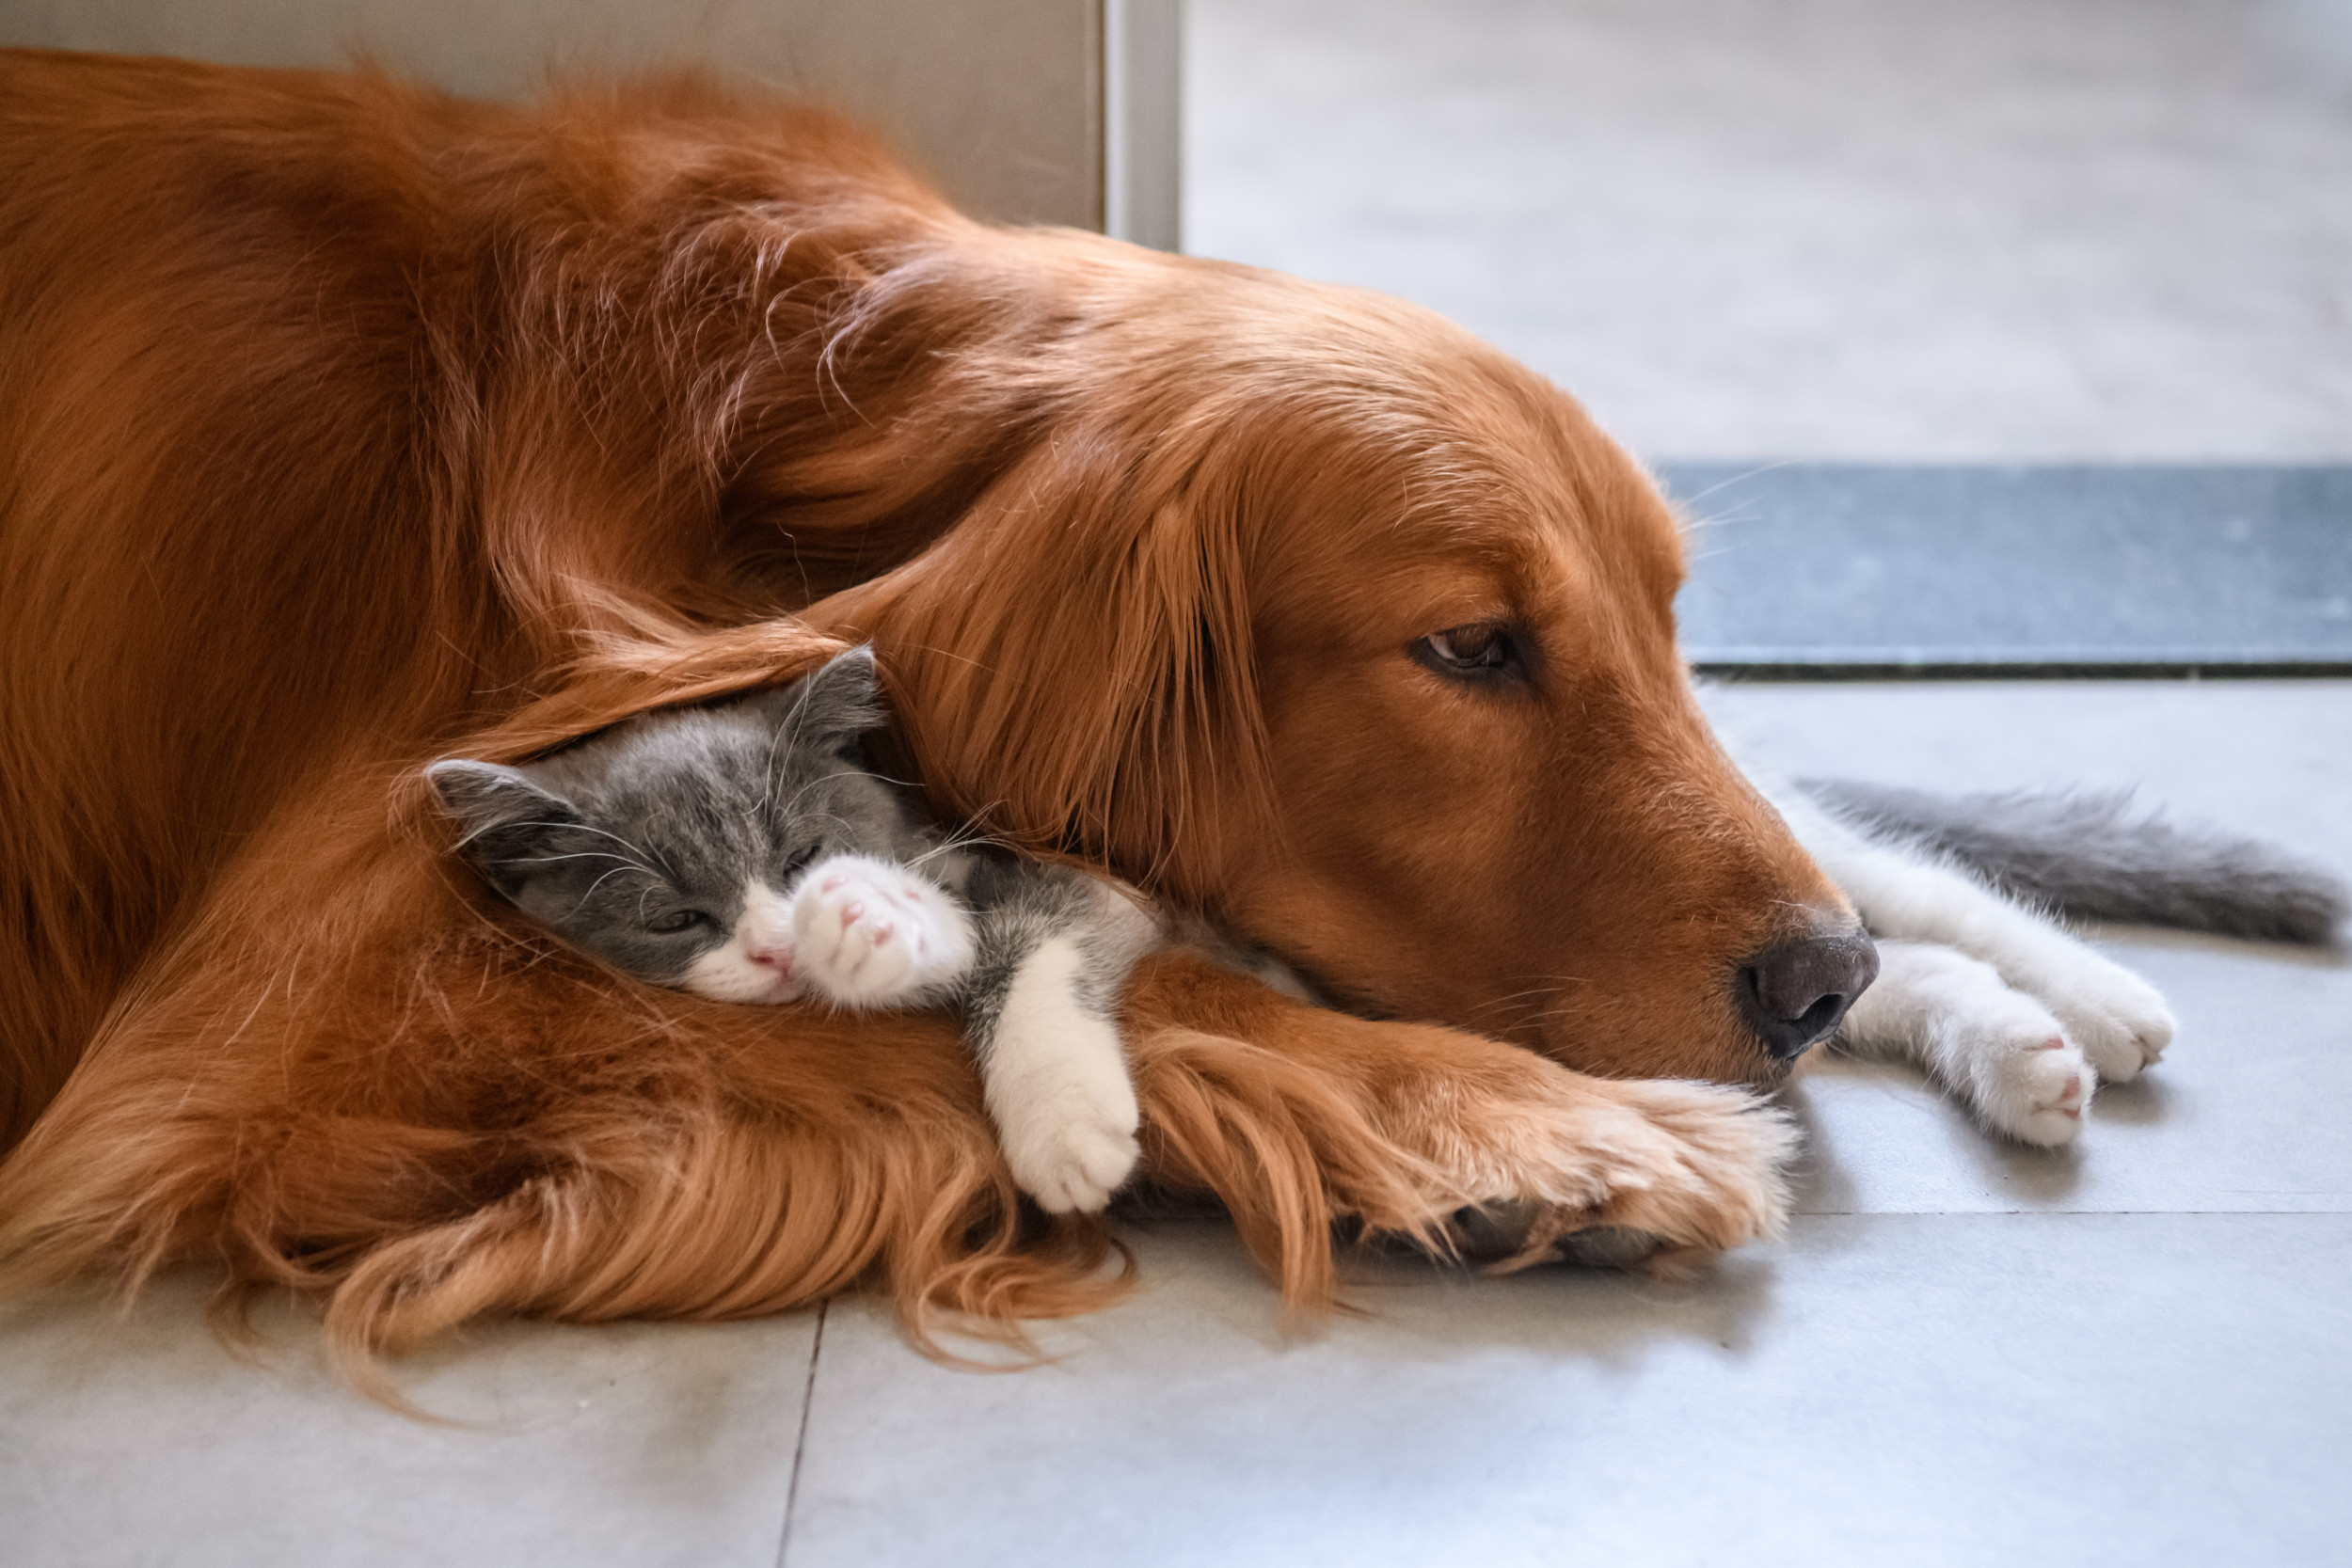 Dog and Cat That Are Best Friends Melt Hearts Online